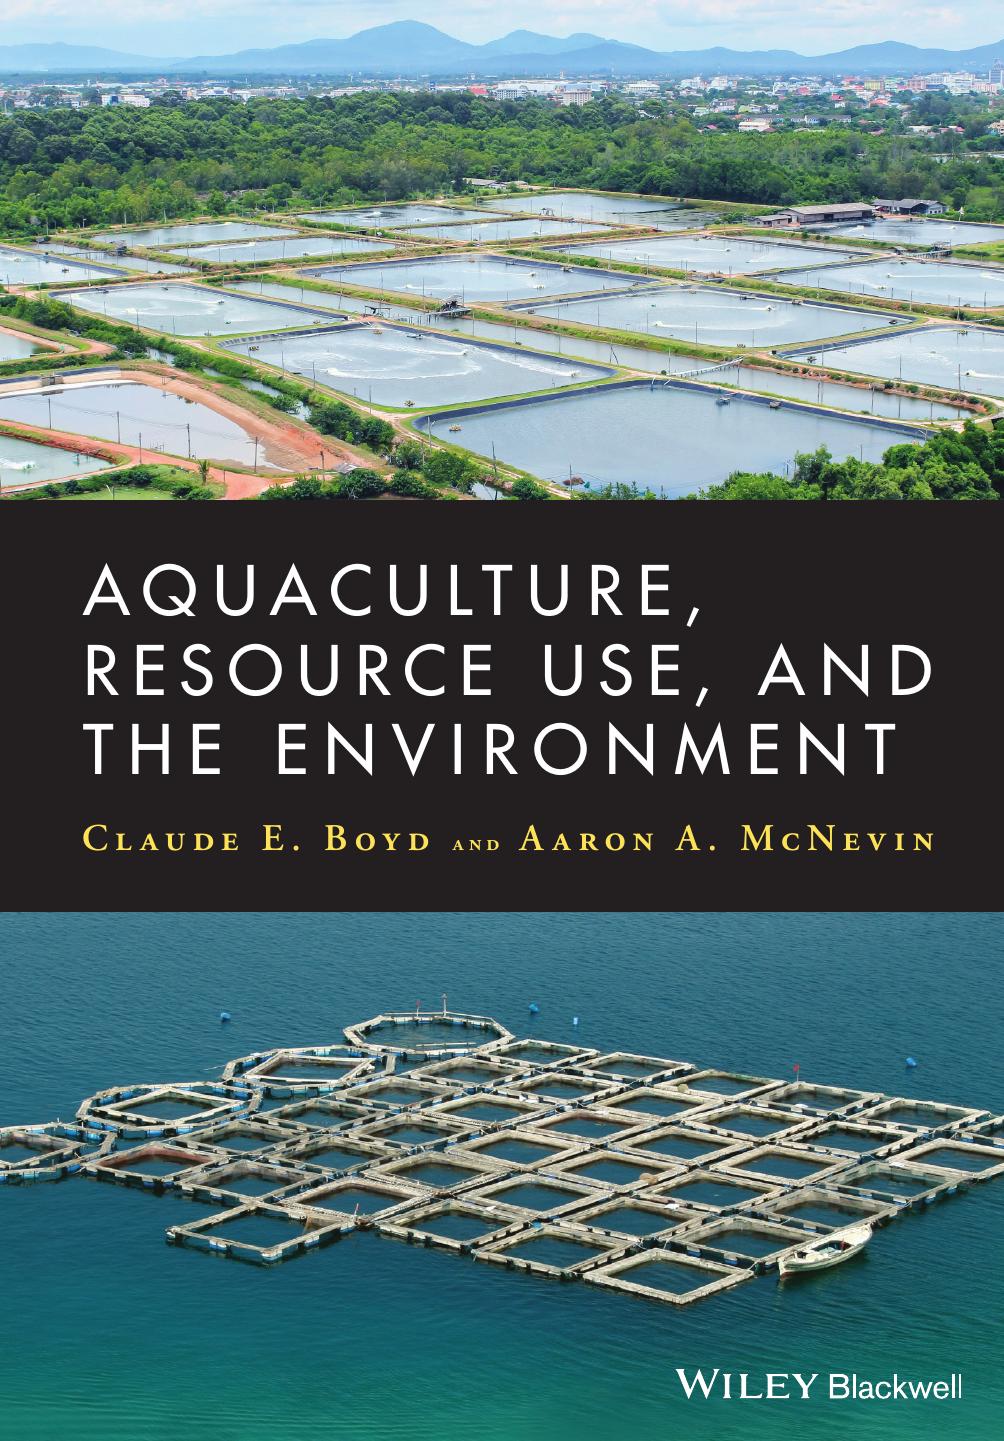 Aquaculture, Resource Use, and the Environment